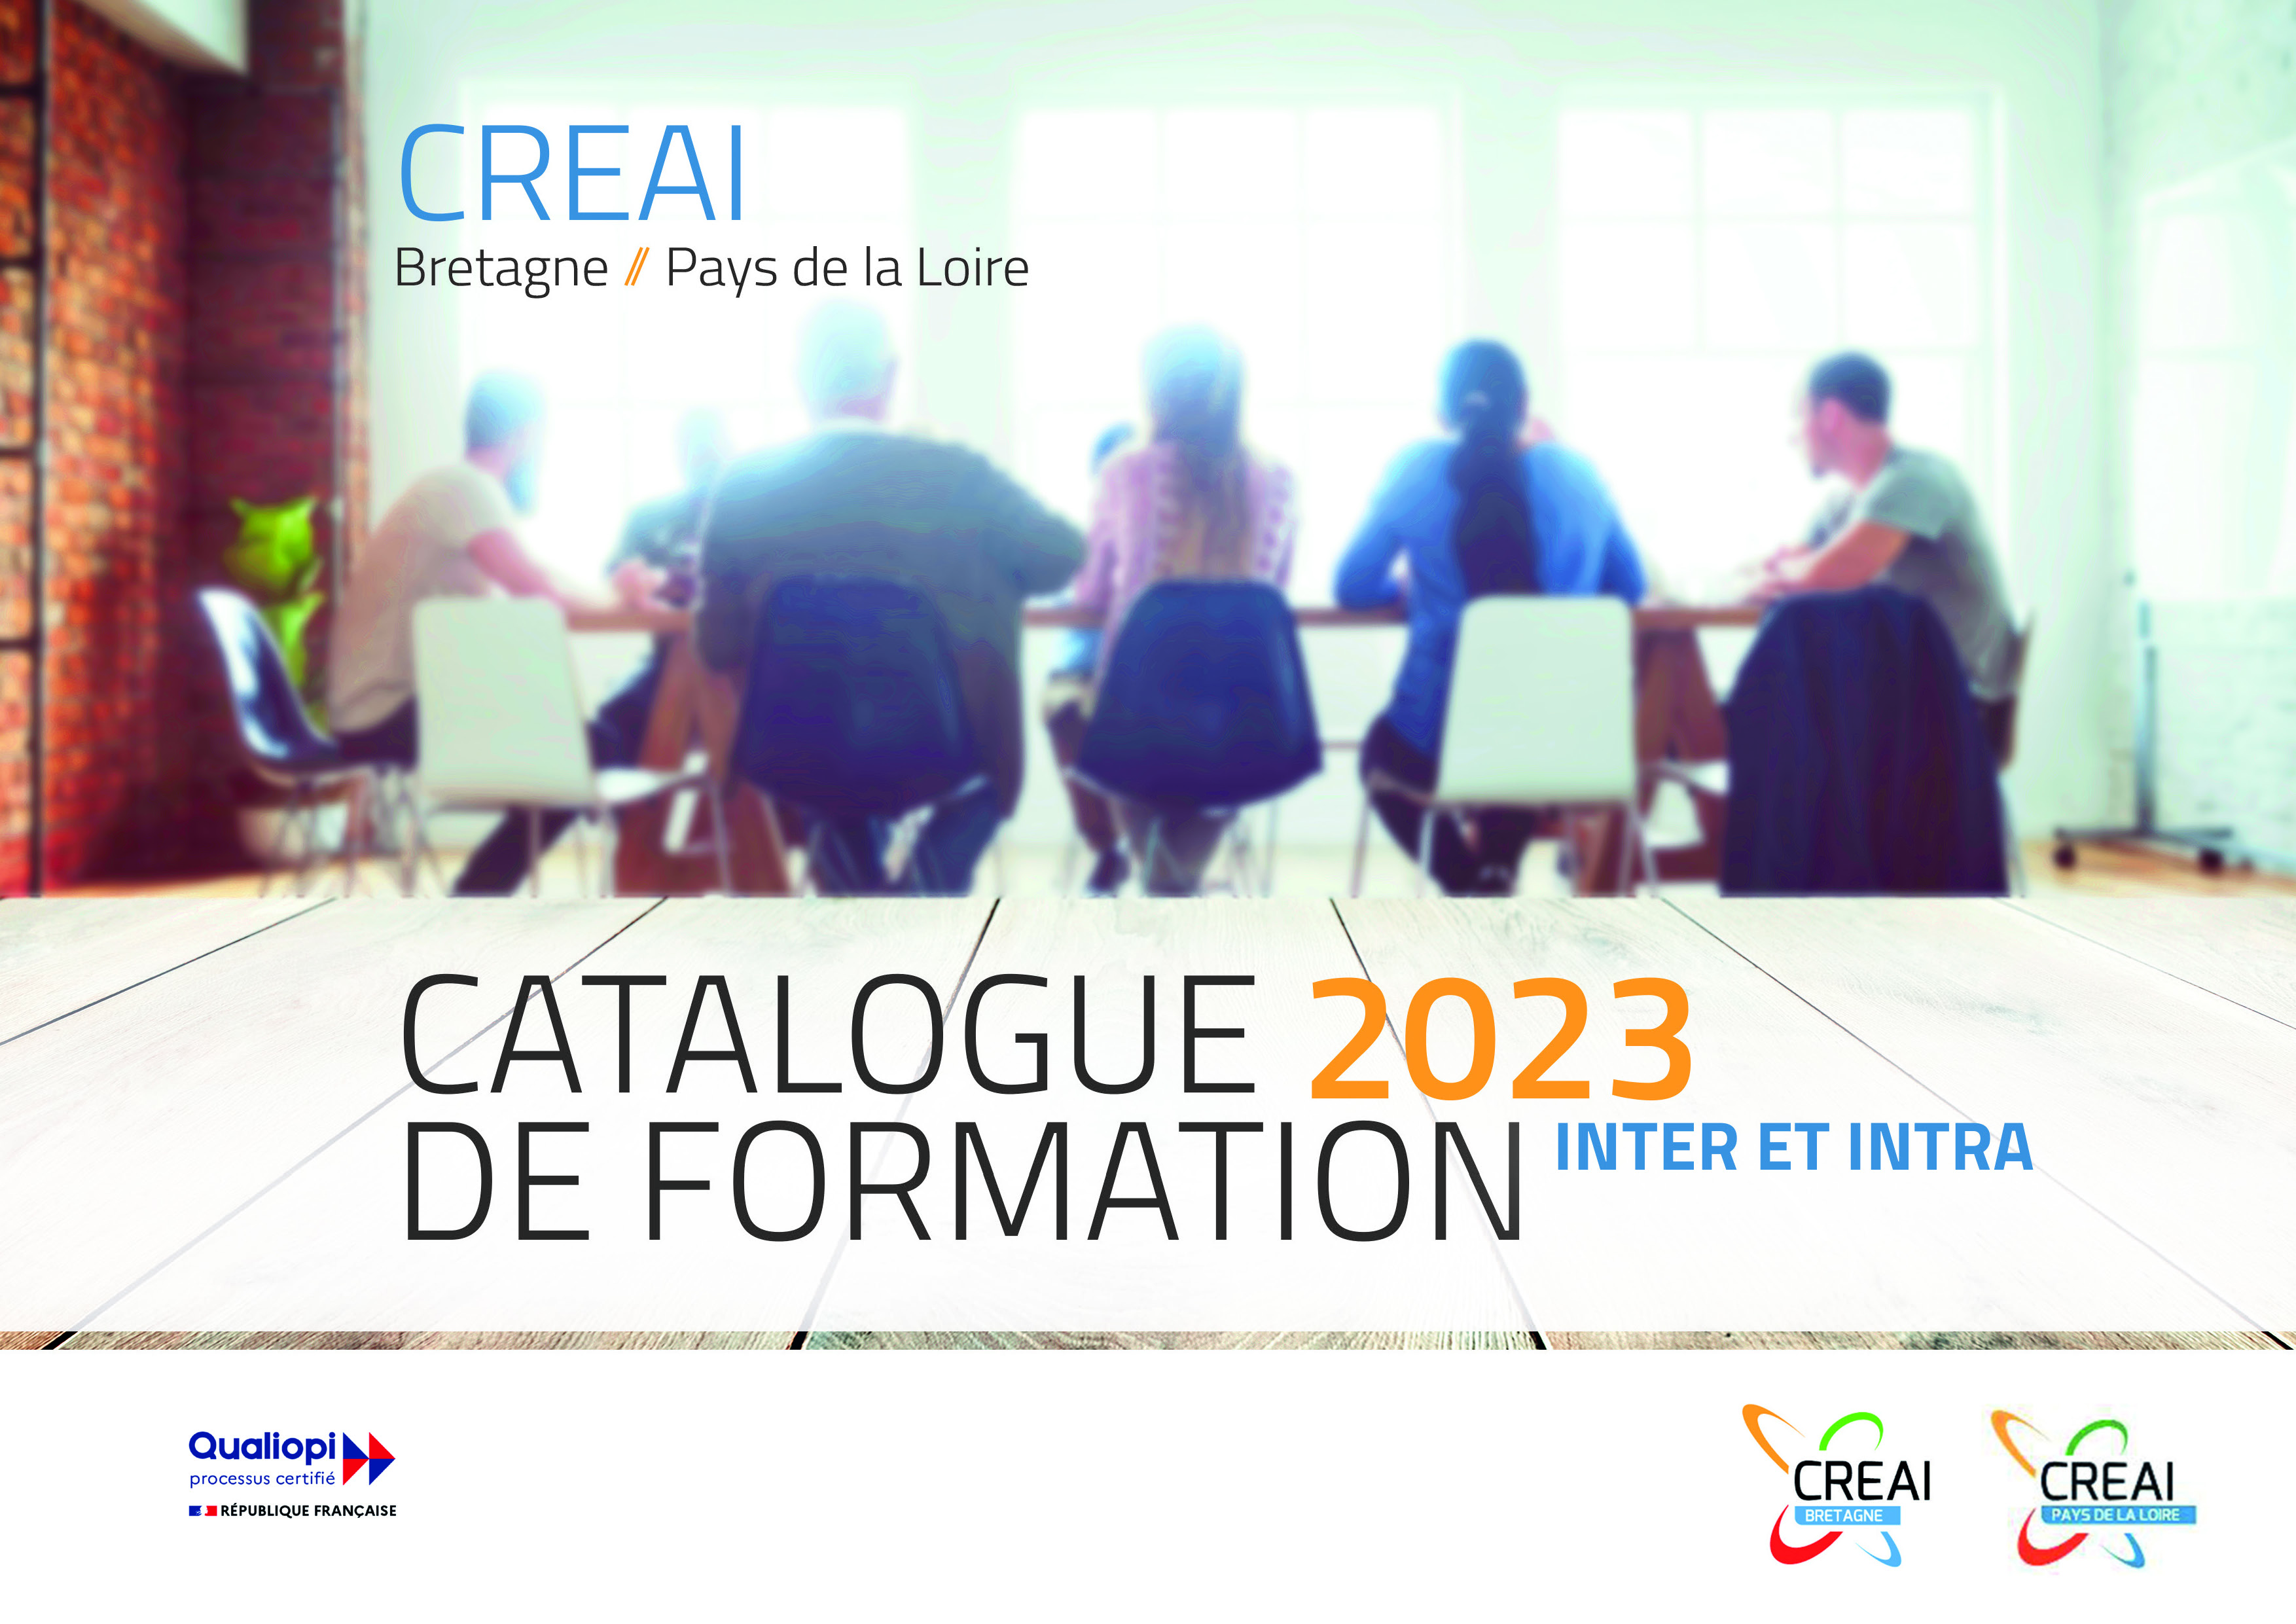 N'HESITEZ PAS A CONSULTER NOS FORMATIONS 2023